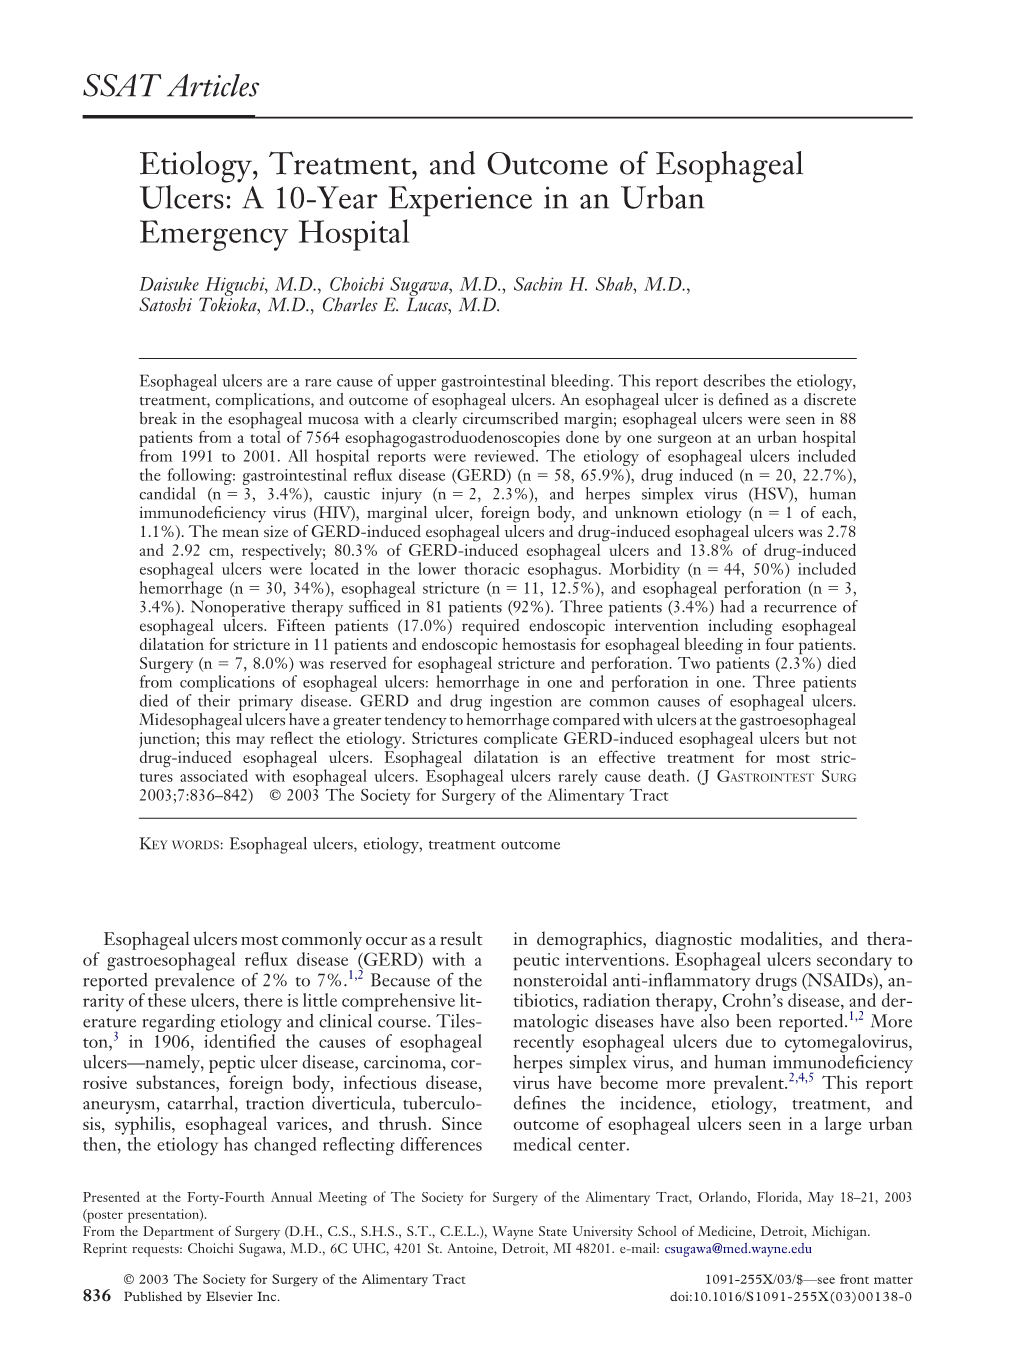 SSAT Articles Etiology, Treatment, and Outcome of Esophageal Ulcers: a 10-Year Experience in an Urban Emergency Hospital